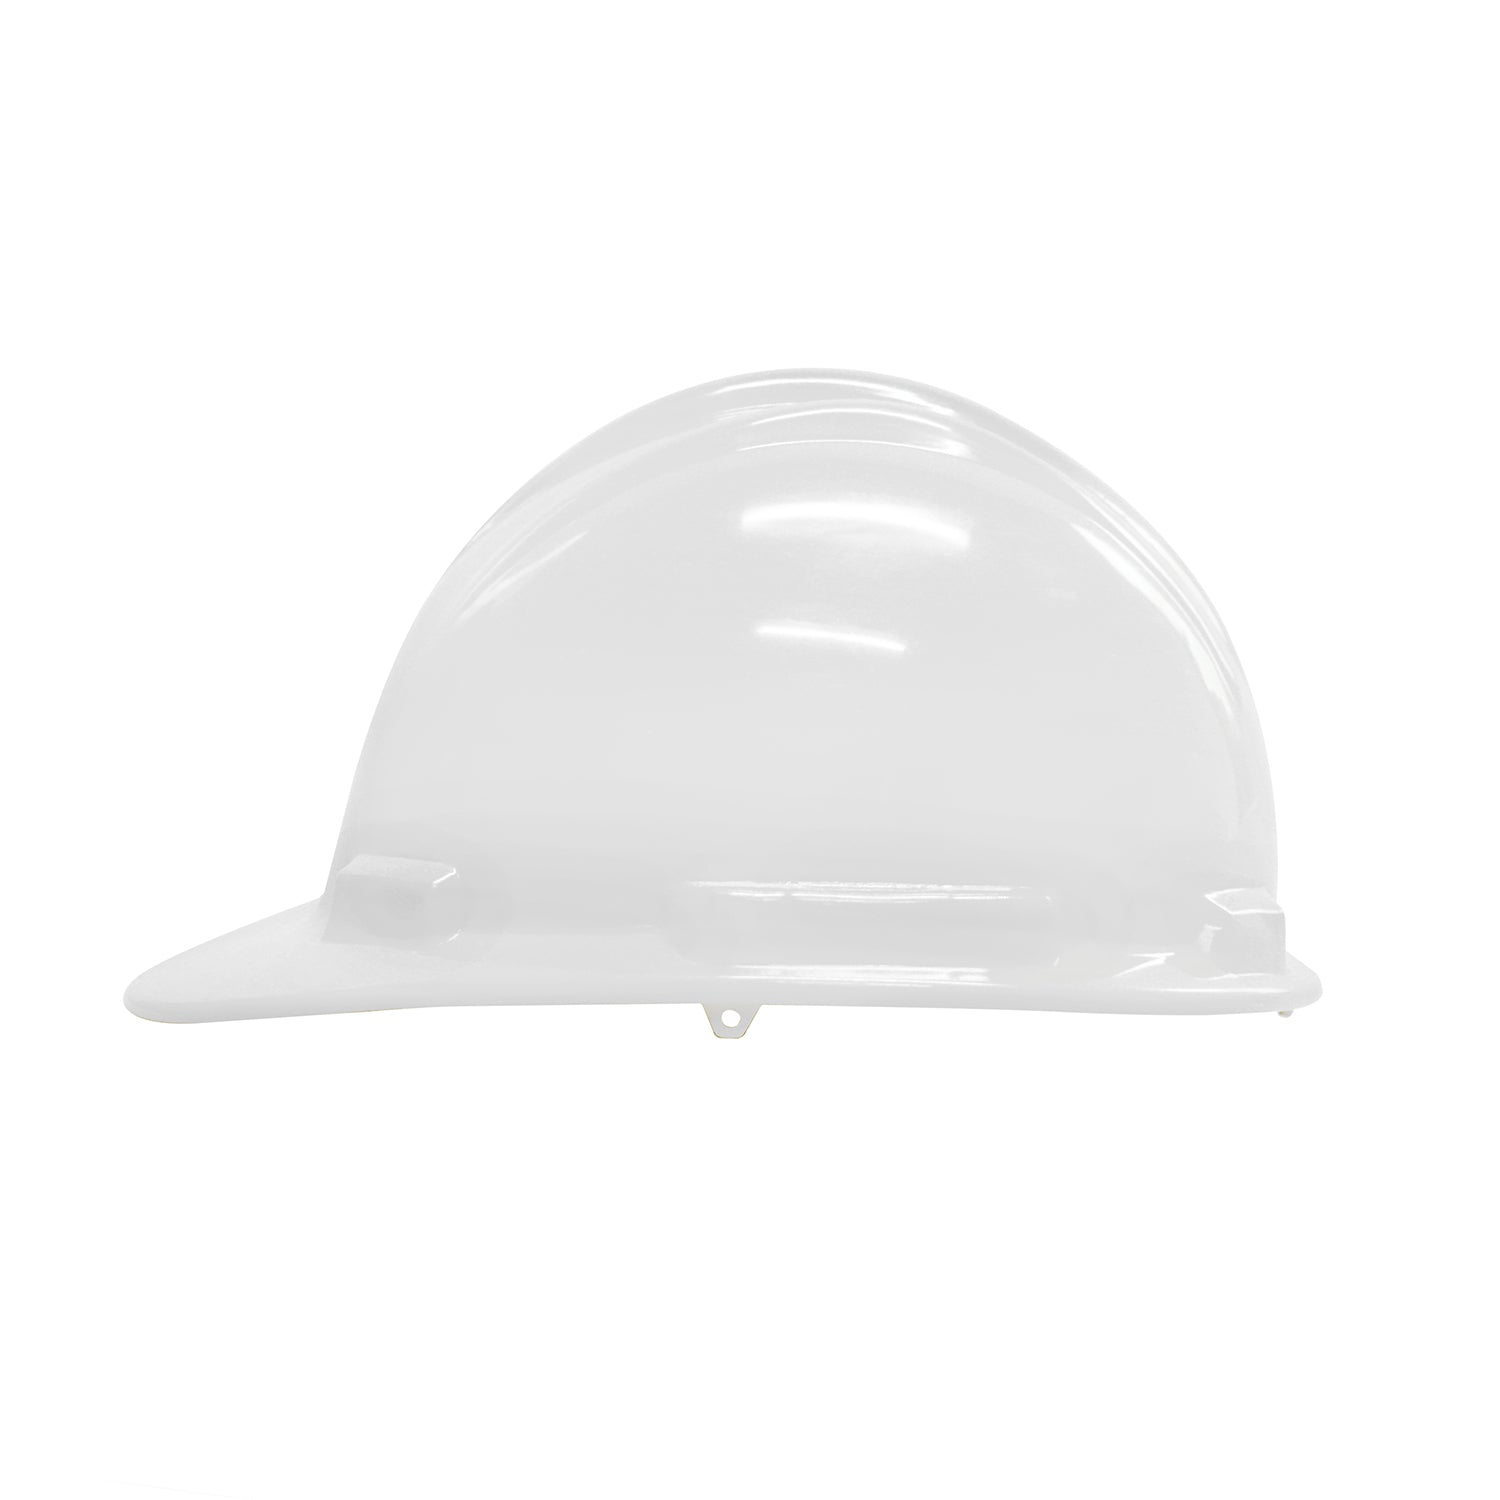 Hard Hat -Safety- eGPS Solutions Inc.